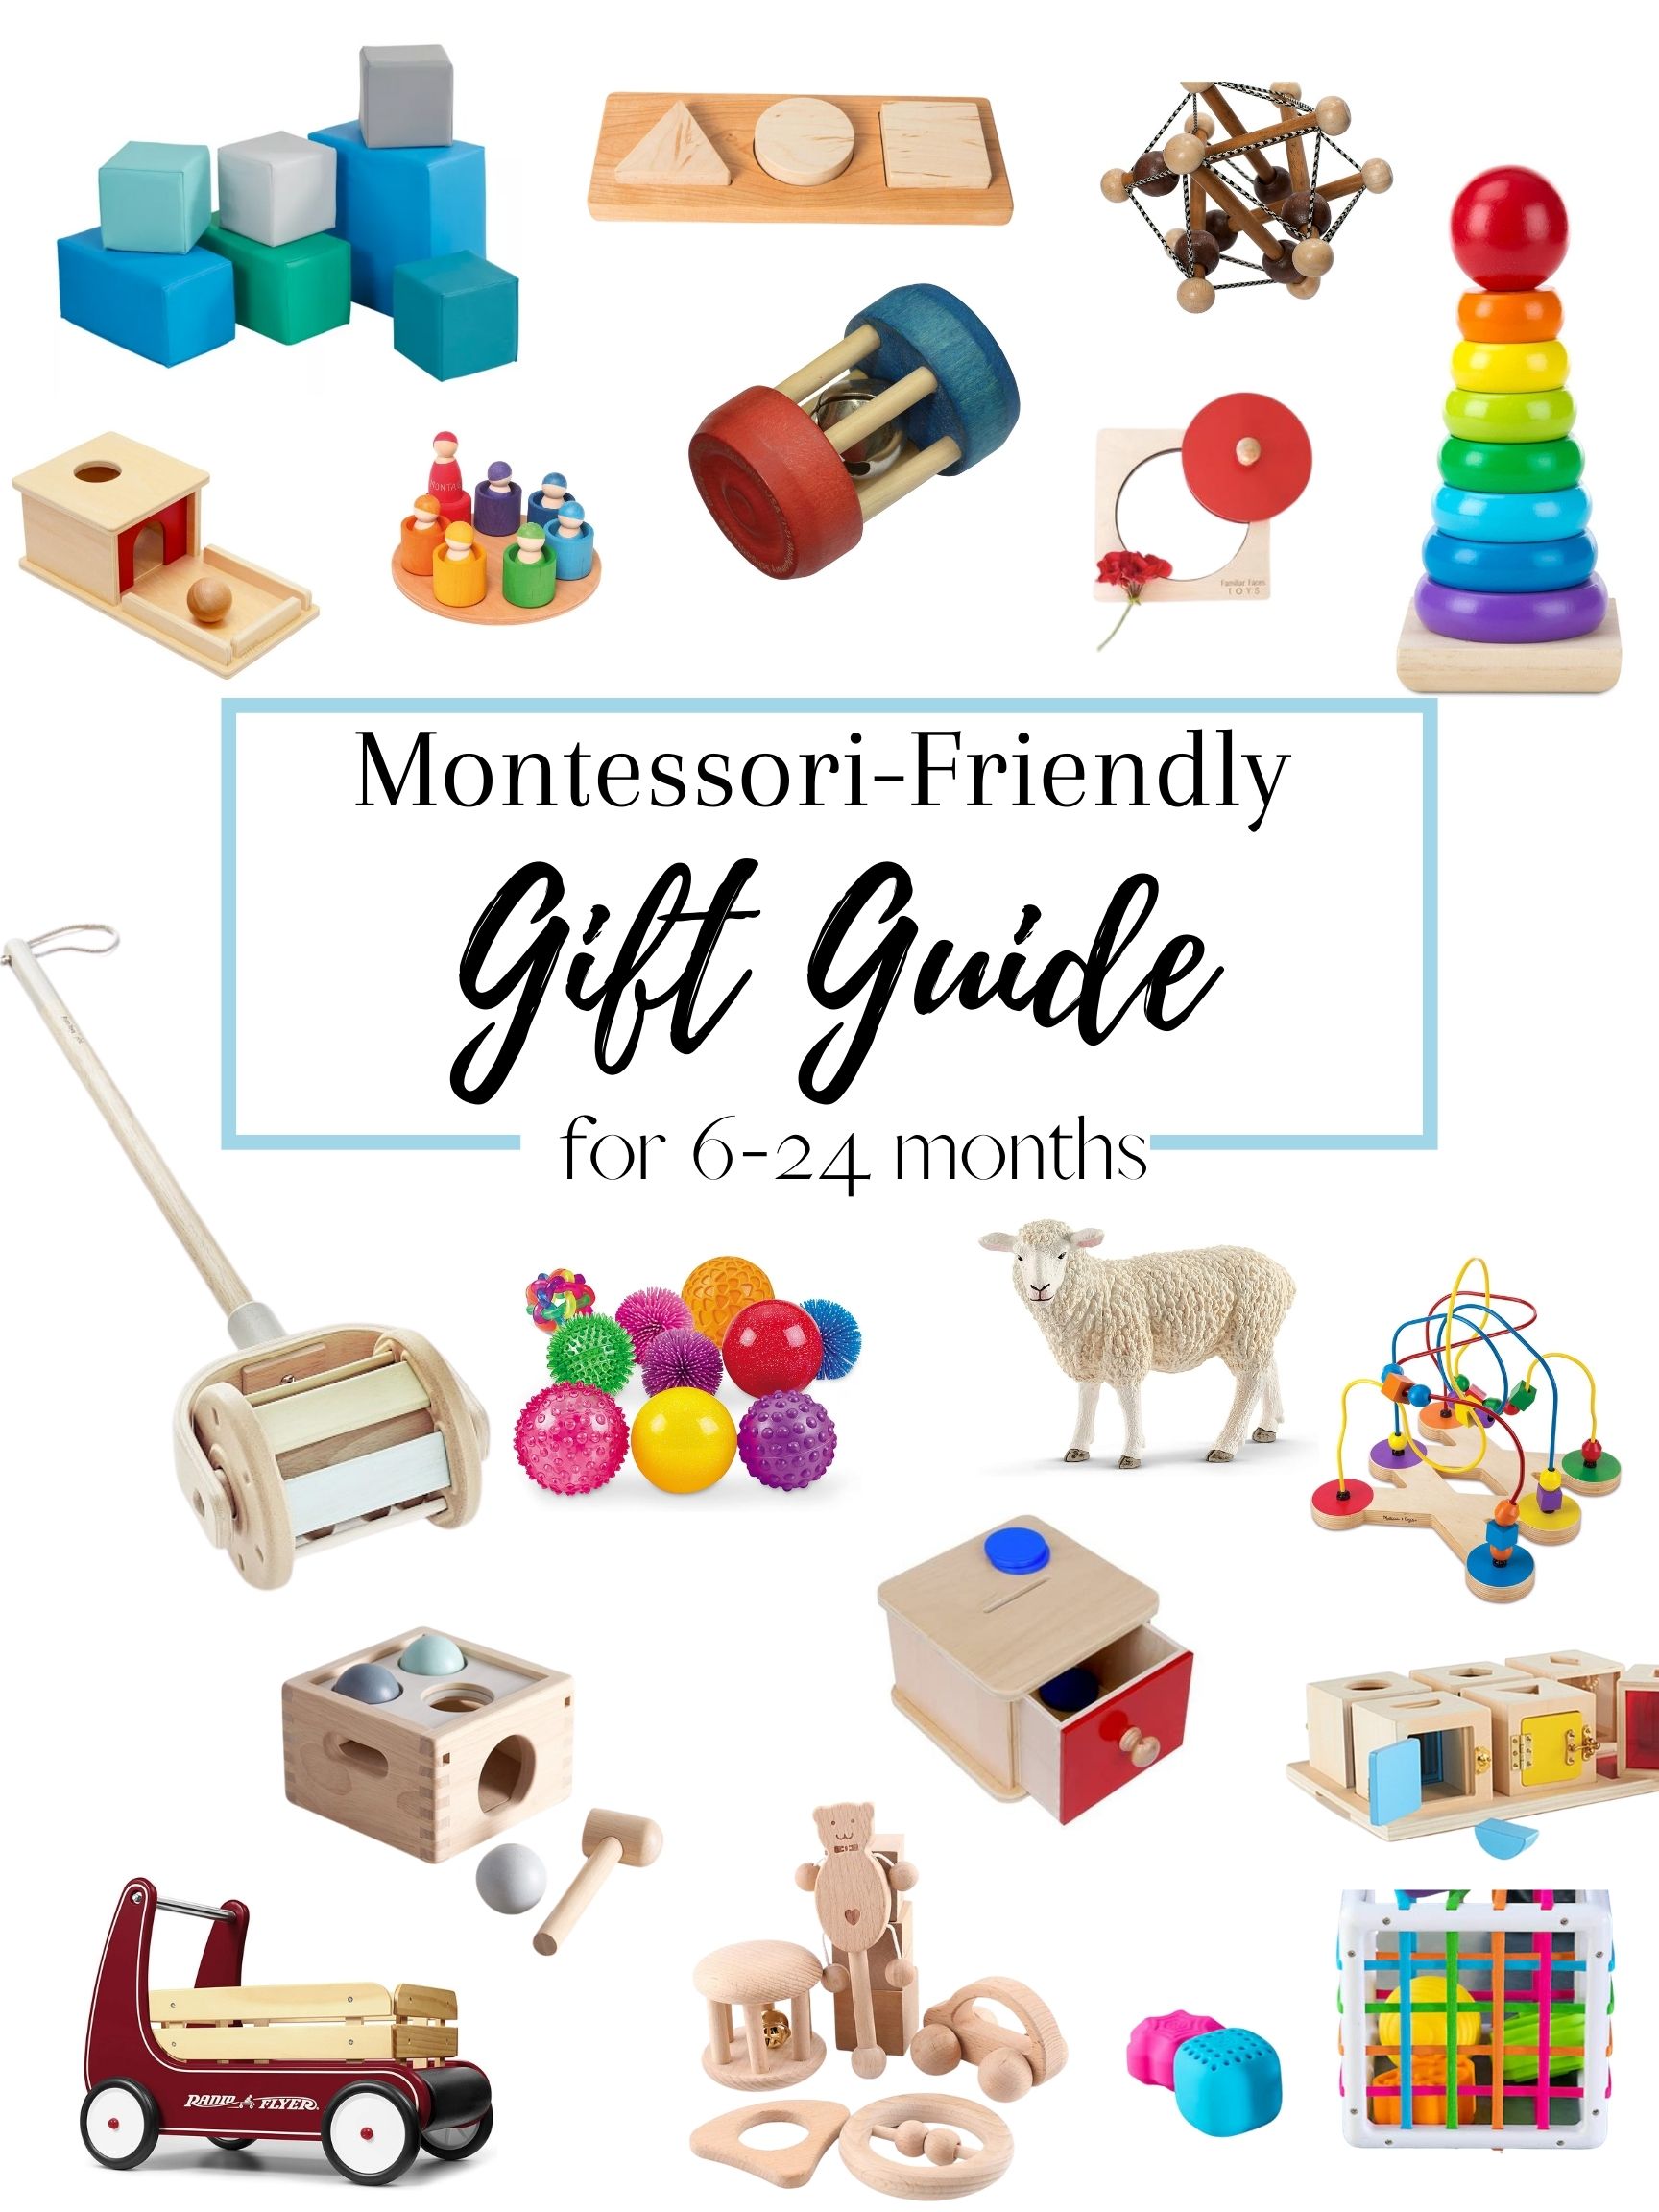 Montessori-Friendly Toys for Children ages 6 months- 2 years old